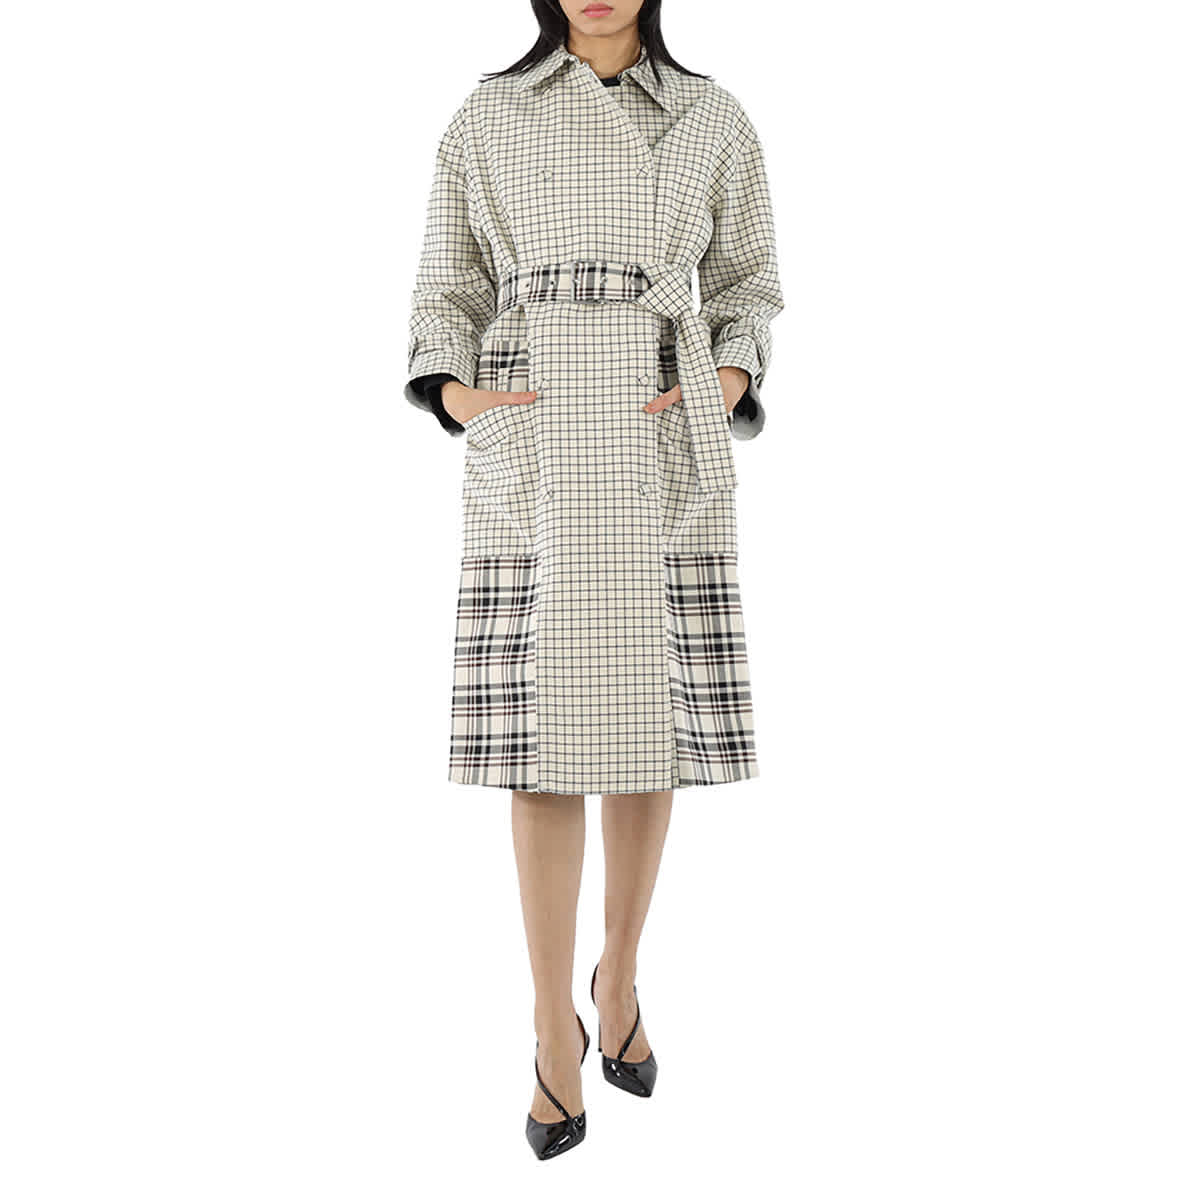 Proenza Schouler Ladies Windowpane Plaid Belted Trench Coat, Brand Size 2 - image 1 of 1